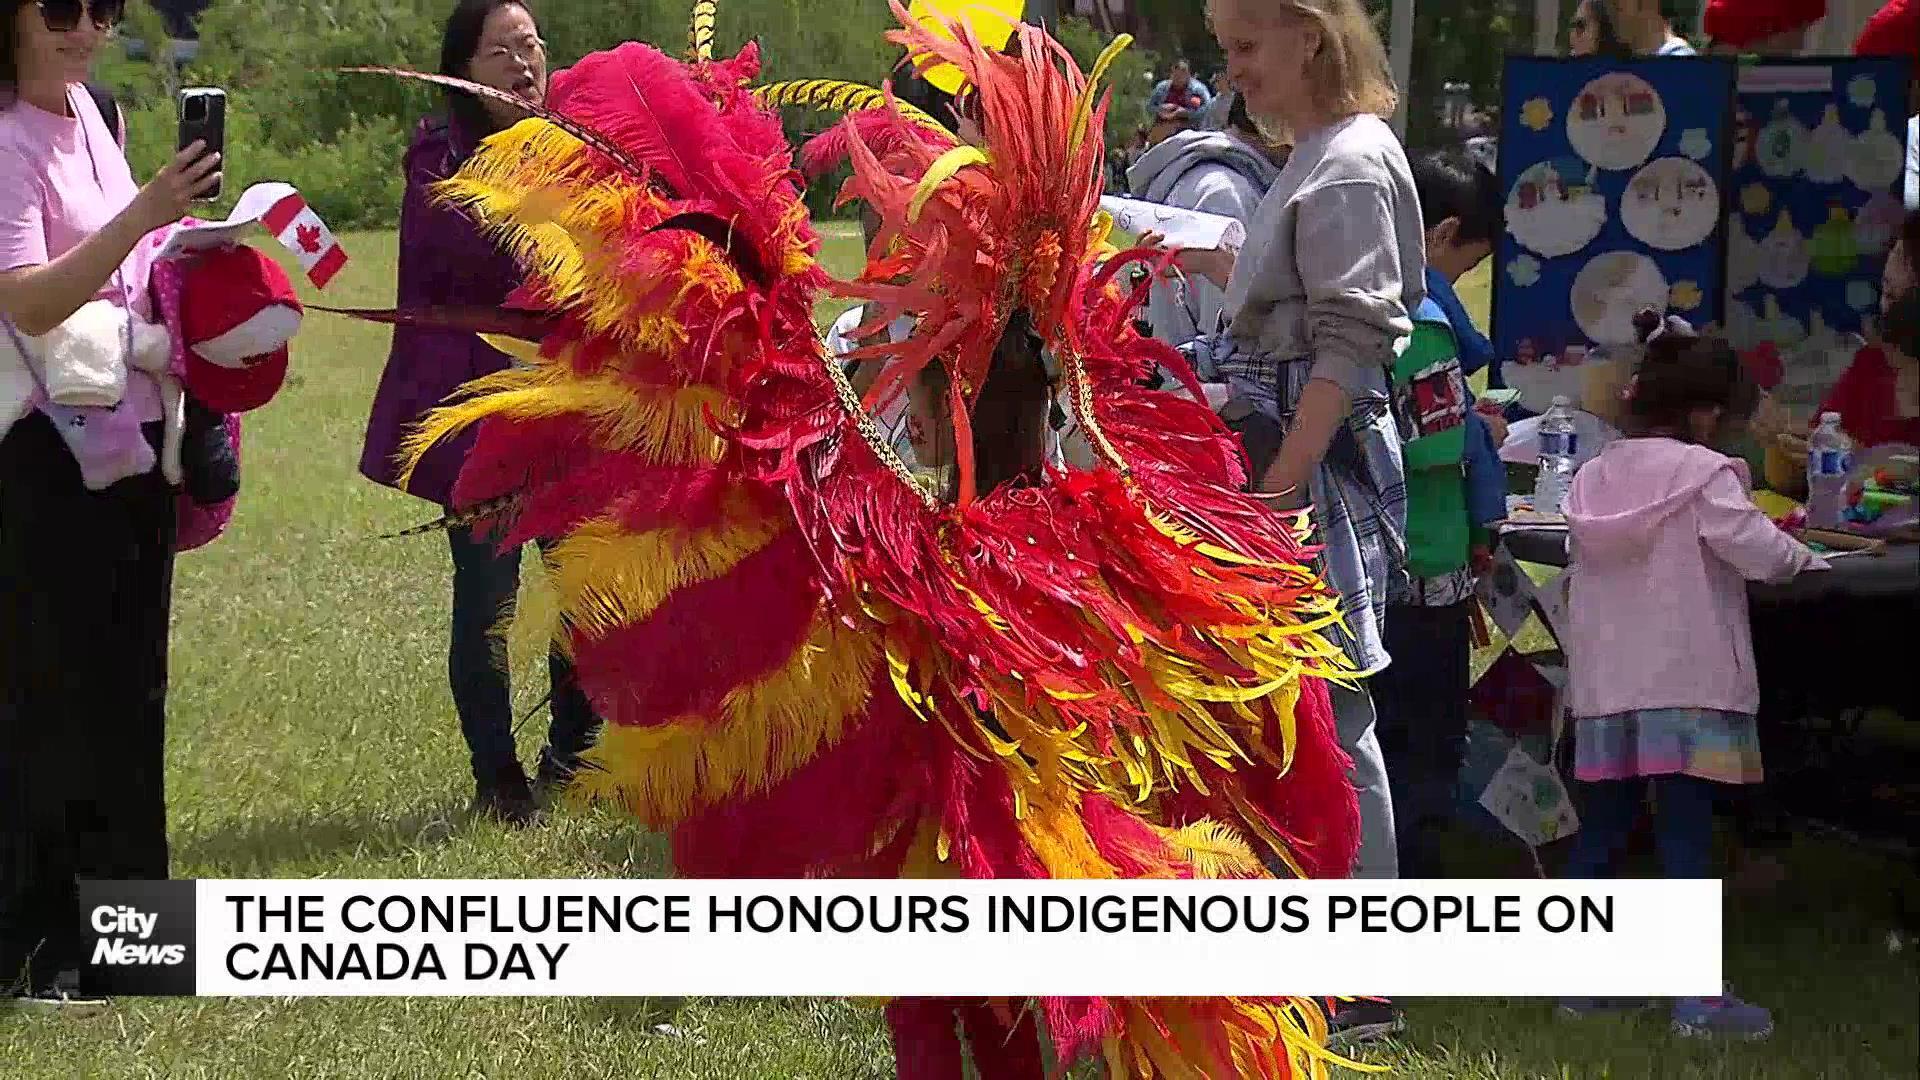 The Confluence honors Indigenous People on Canada Day